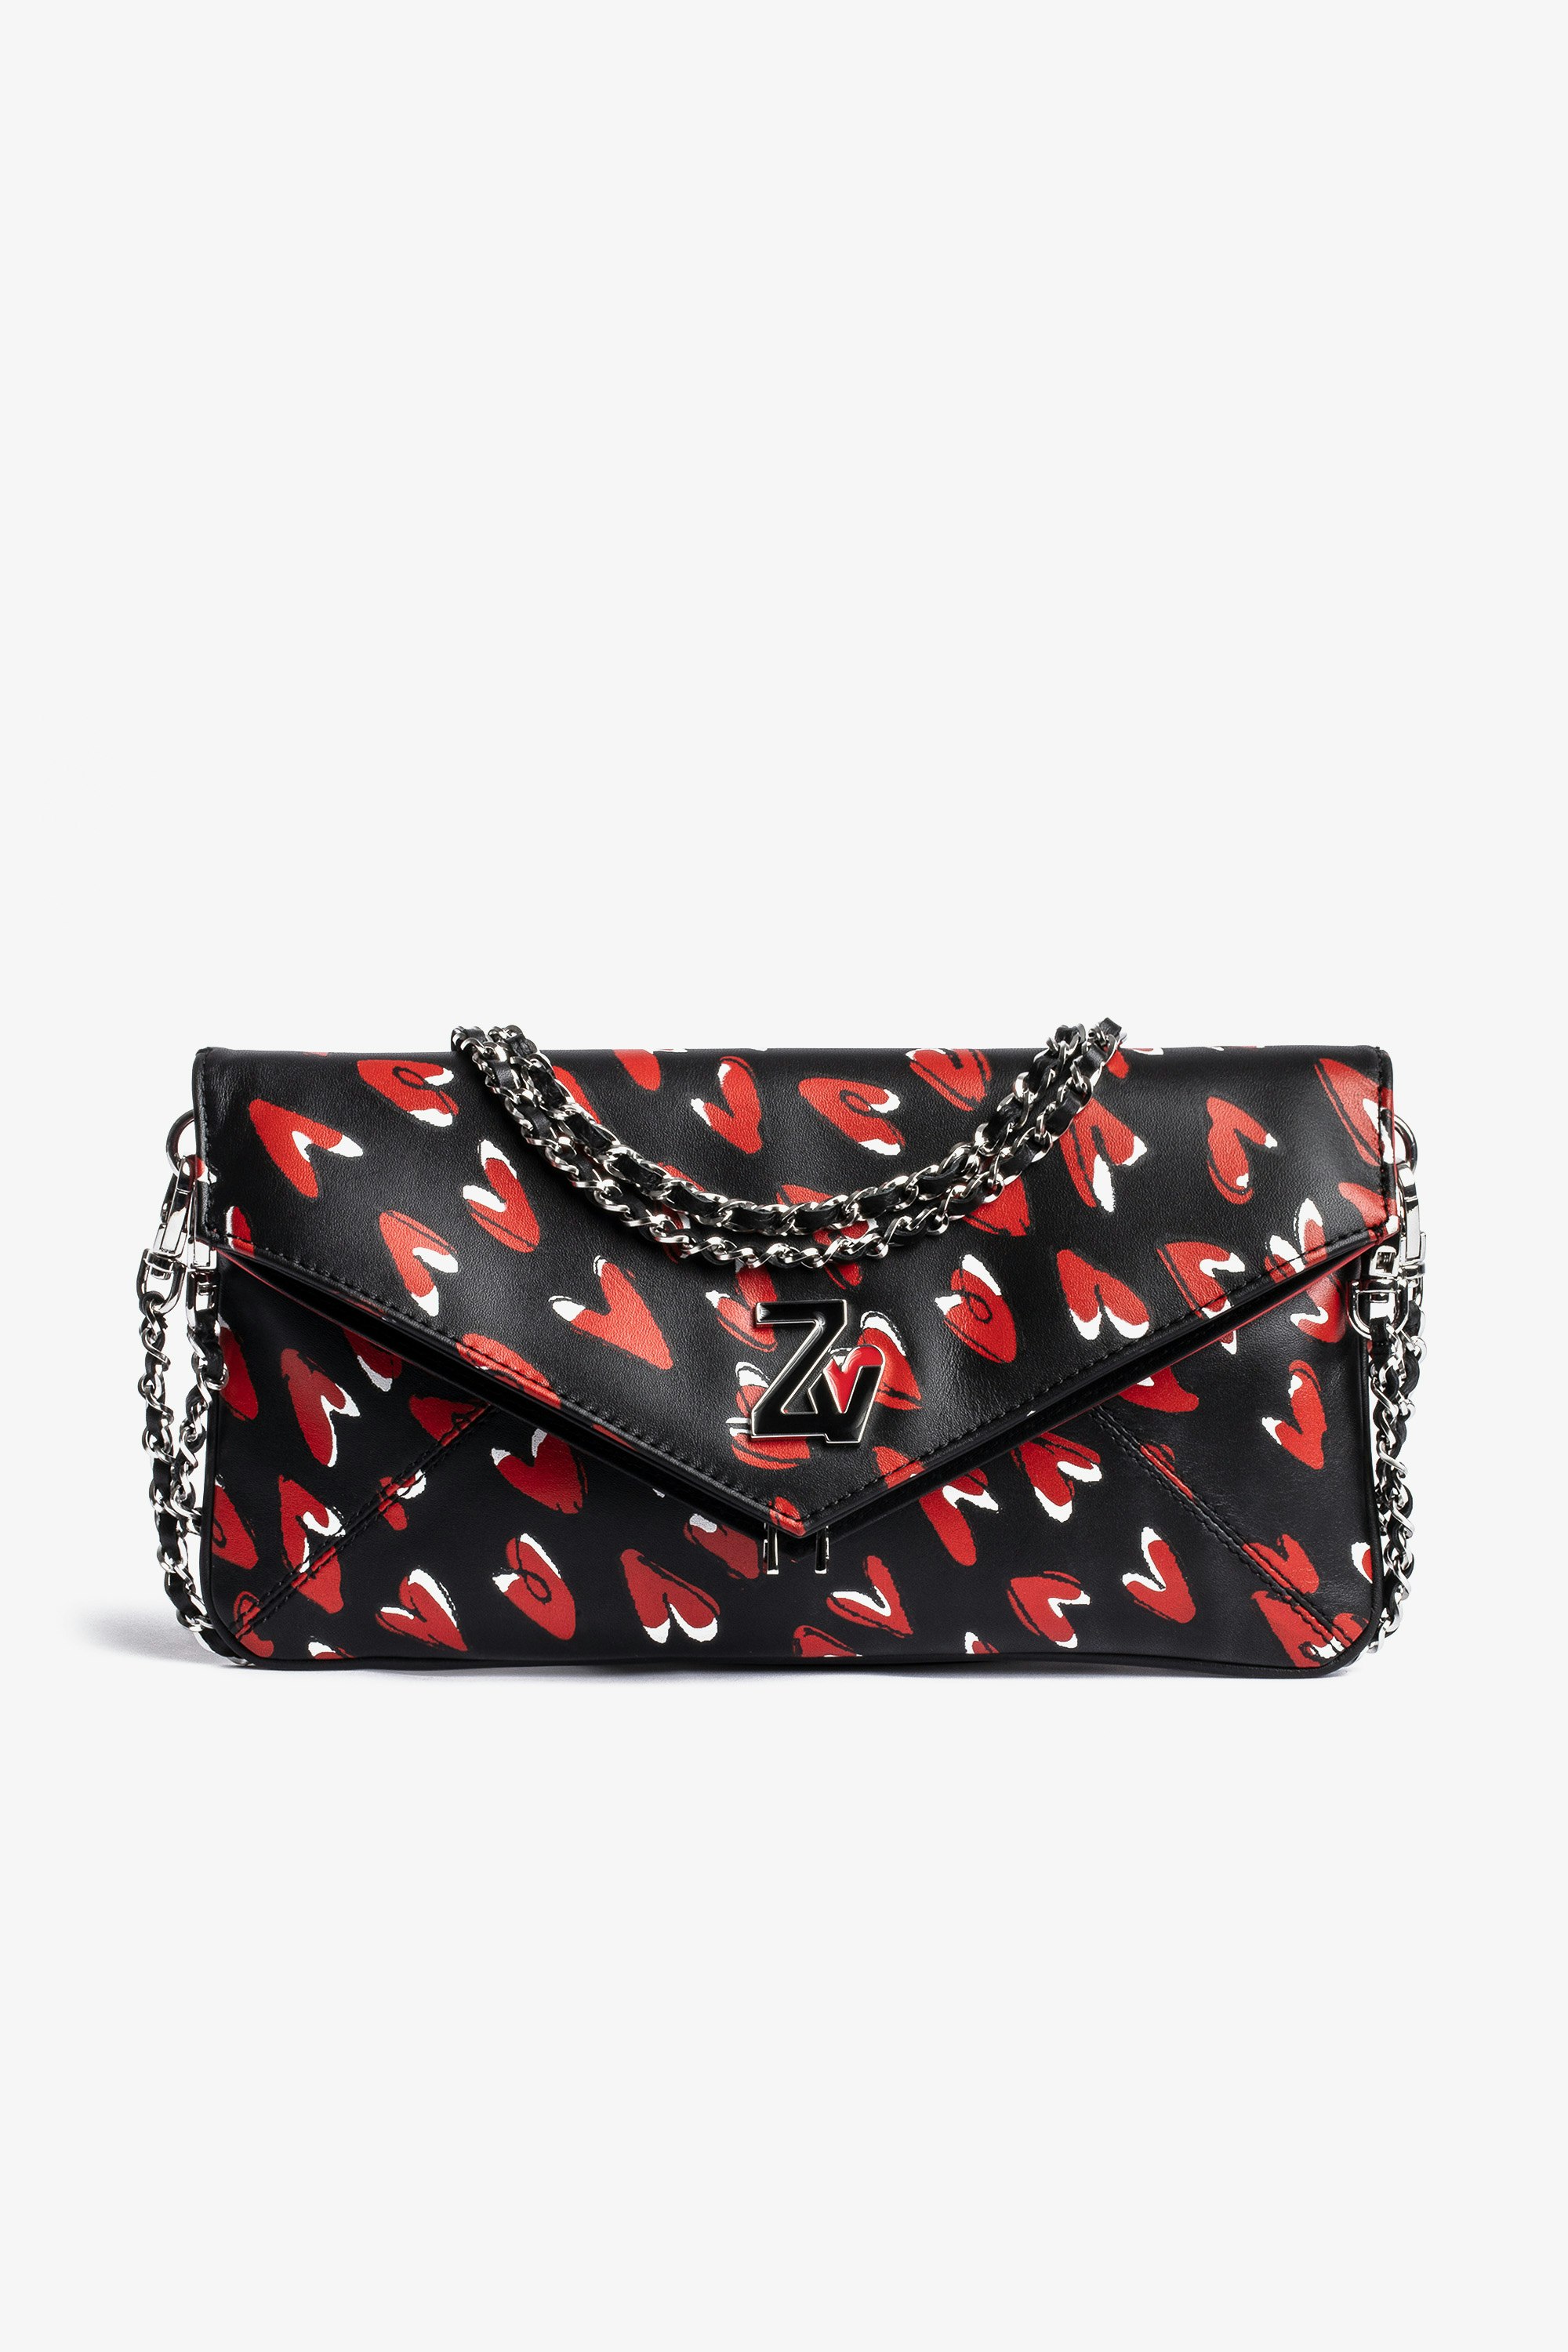 Rockeur クラッチバッグ Women’s clutch bag in black grained leather with heart pattern